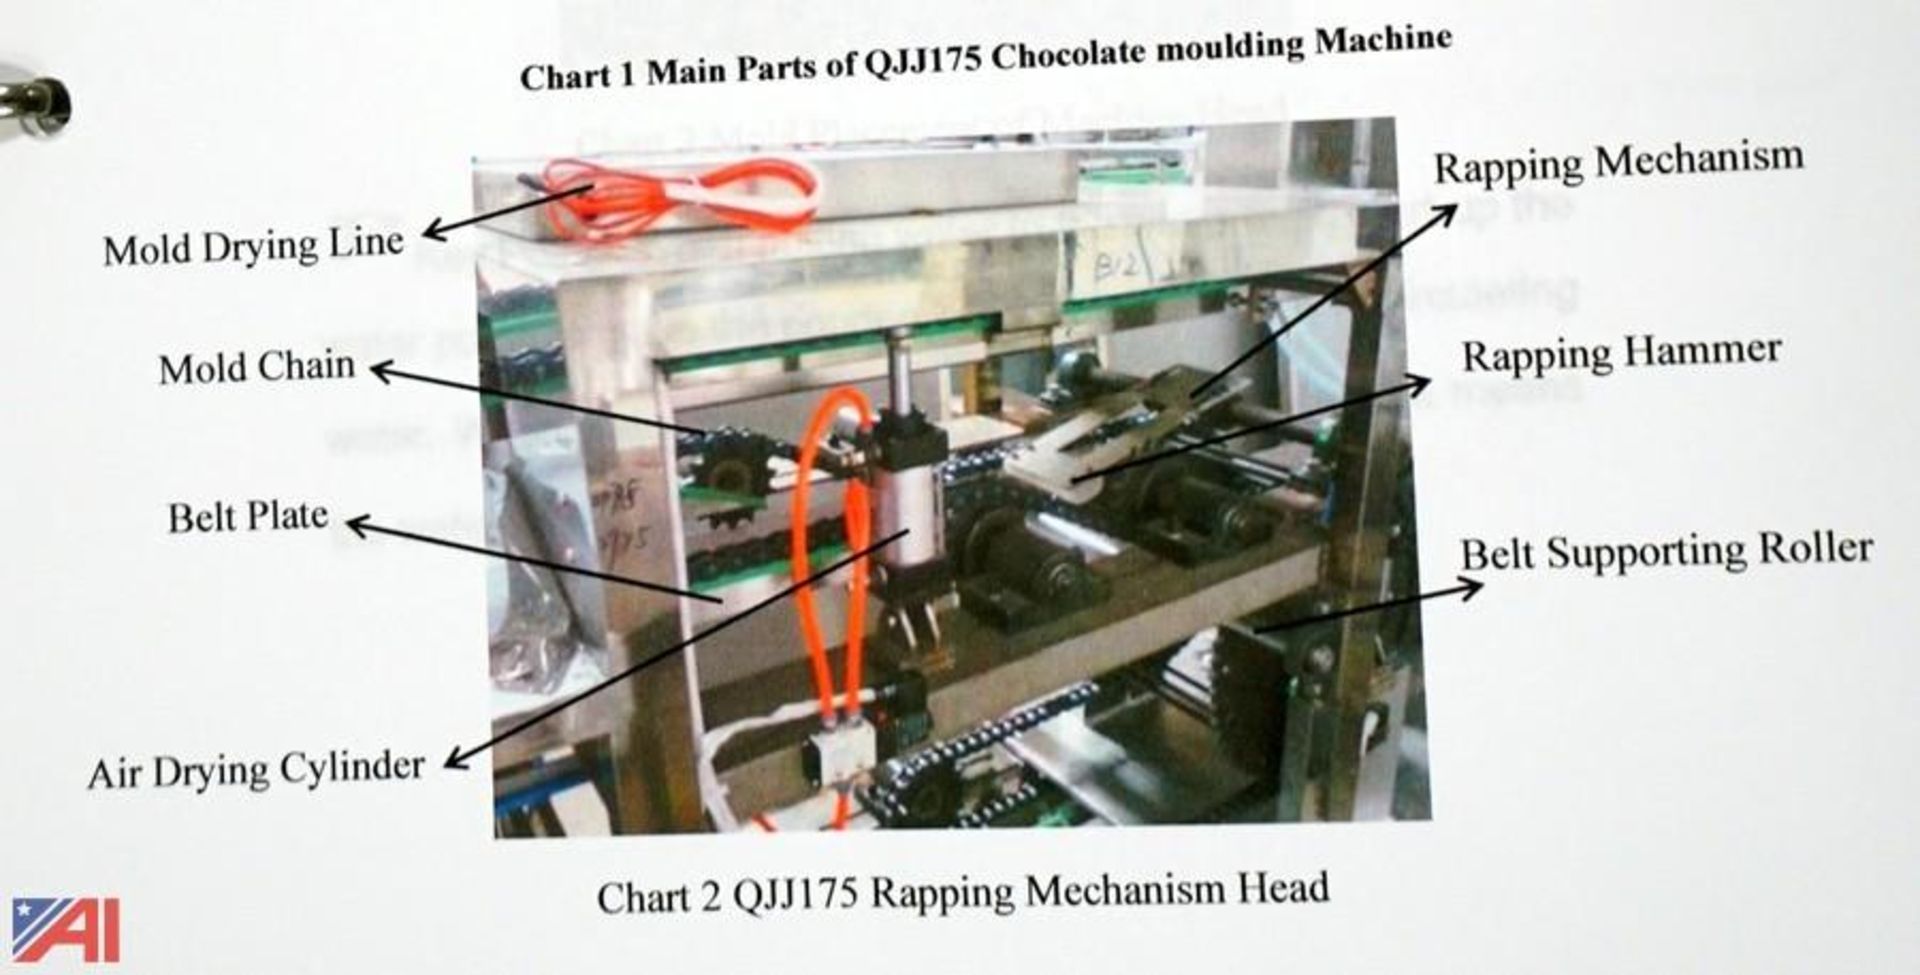 Asset 41 - Nantong Twinkle Machinery Equipment Co. One Shot Depositor Chocolate Molding Plant - Image 8 of 46